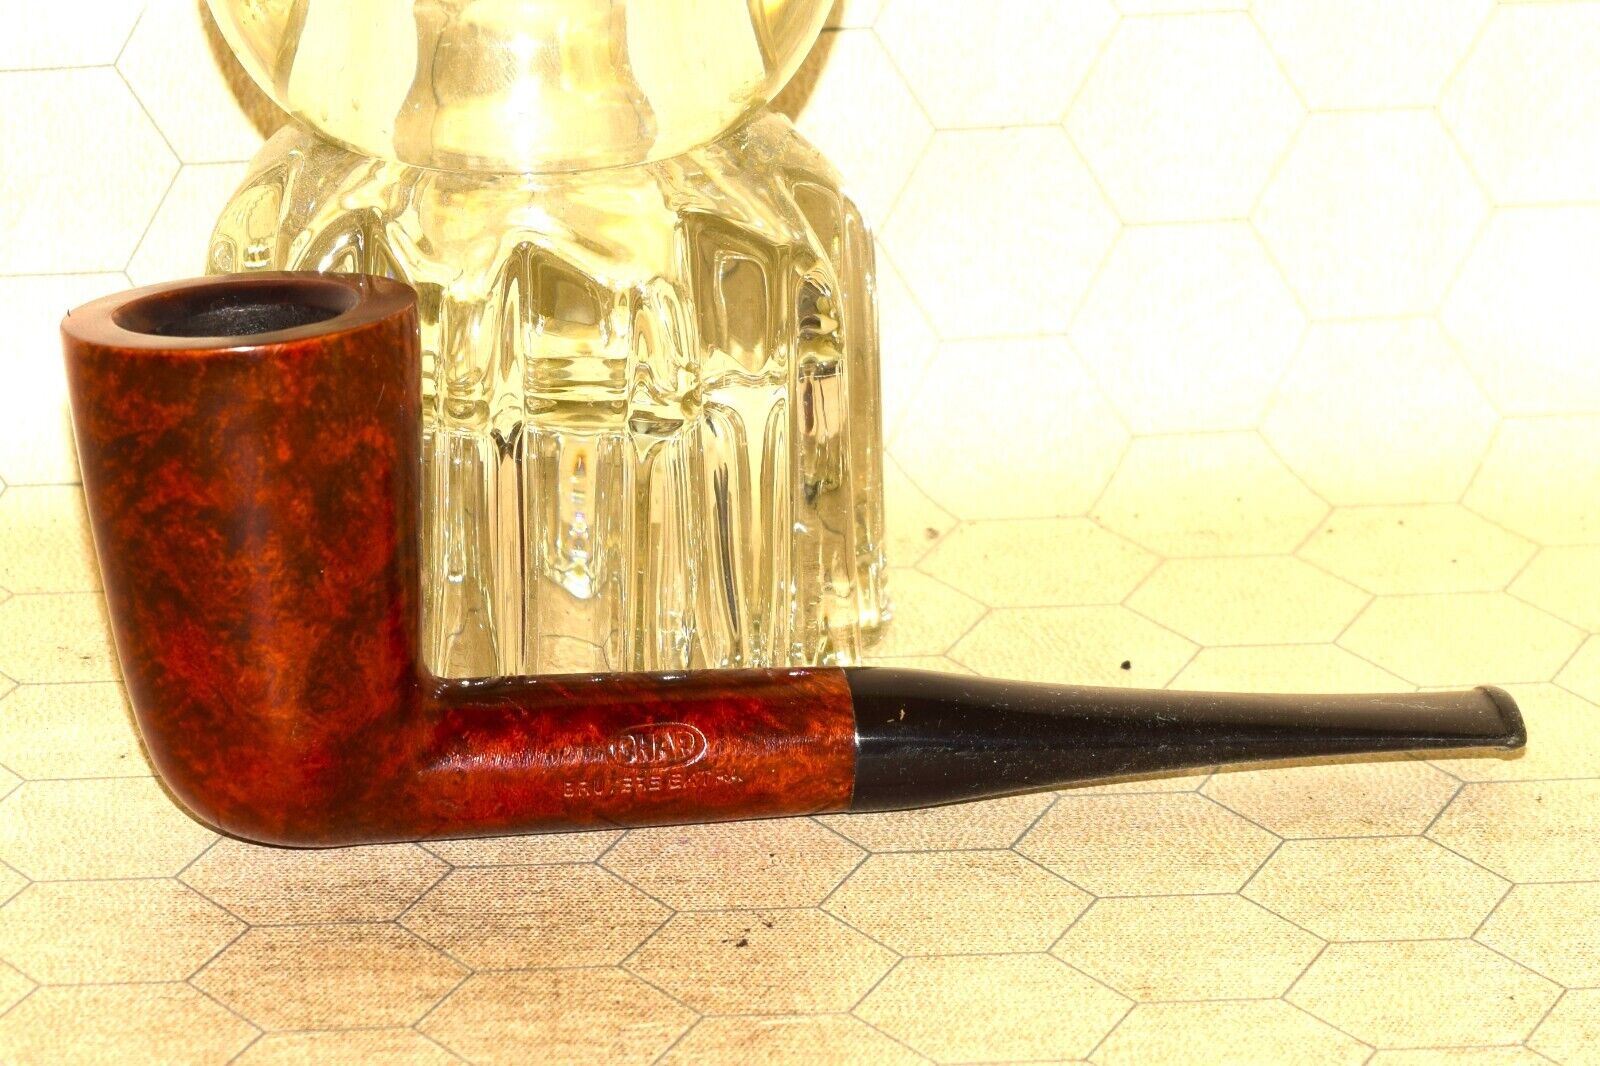 CHAP BRUYERE EXTRA 132 HORS CLASSE PIPE ST. CLAUDE 9mm Filter Tobacco Pipe #A787